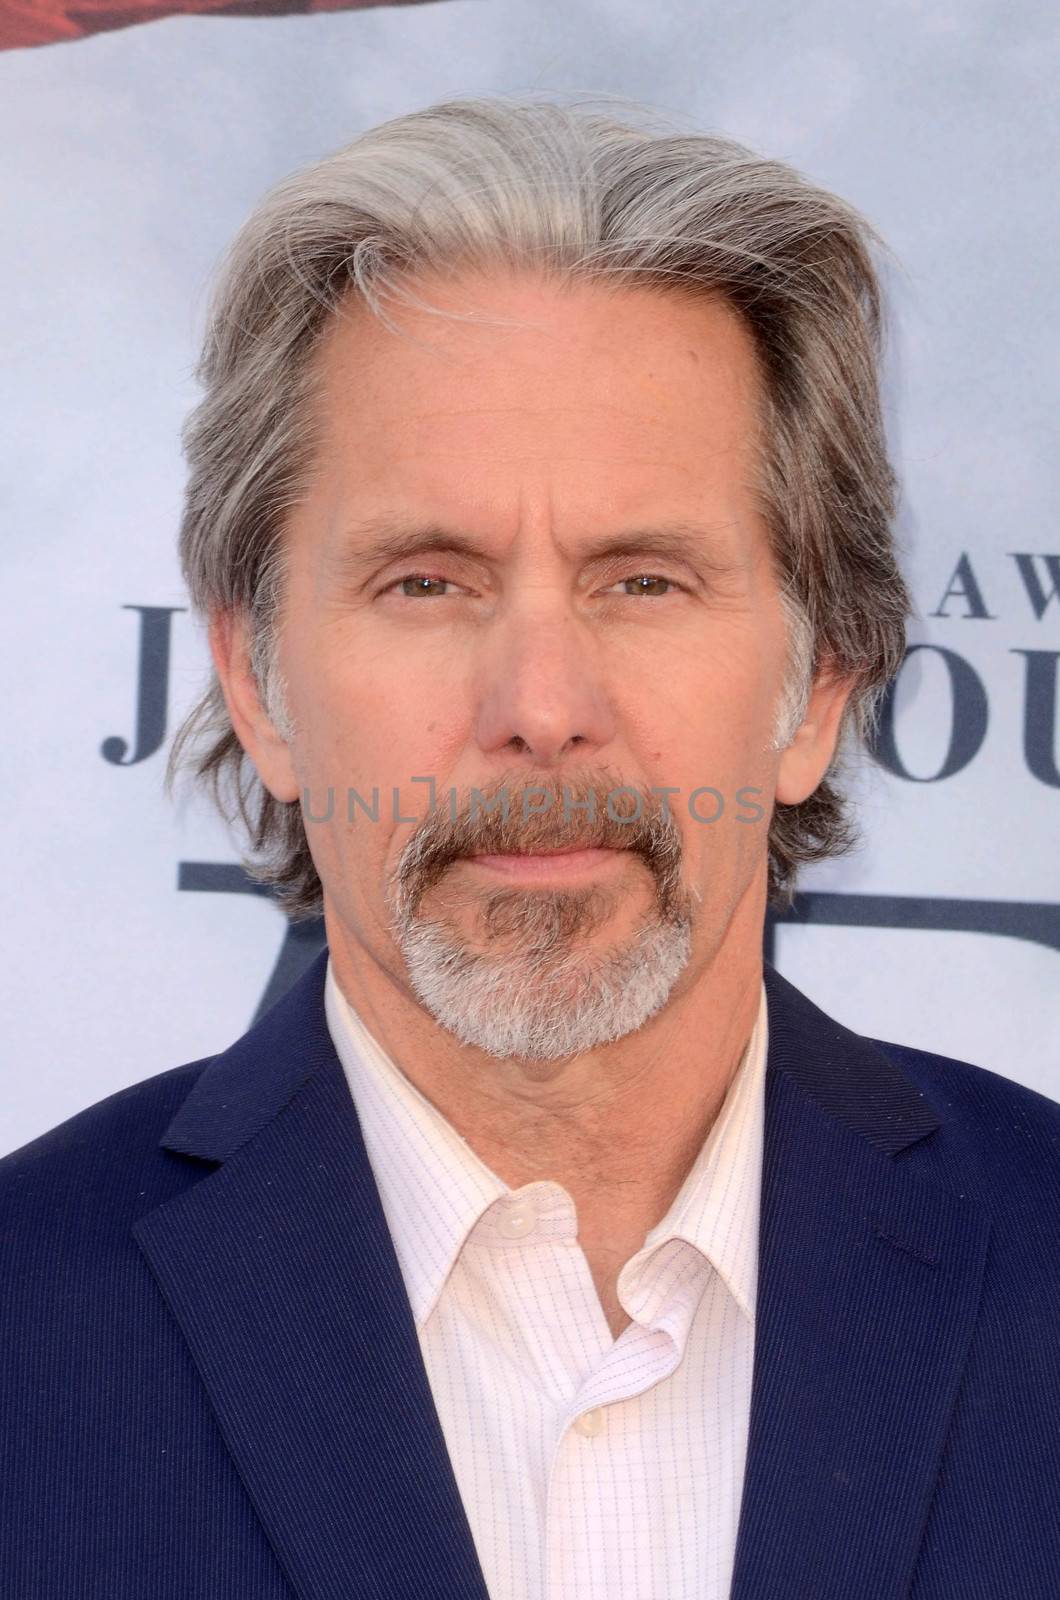 Gary Cole
at FYC for HBO's series VEEP 6th Season, Television Academy, North Hollywood, CA 05-25-17/ImageCollect by ImageCollect